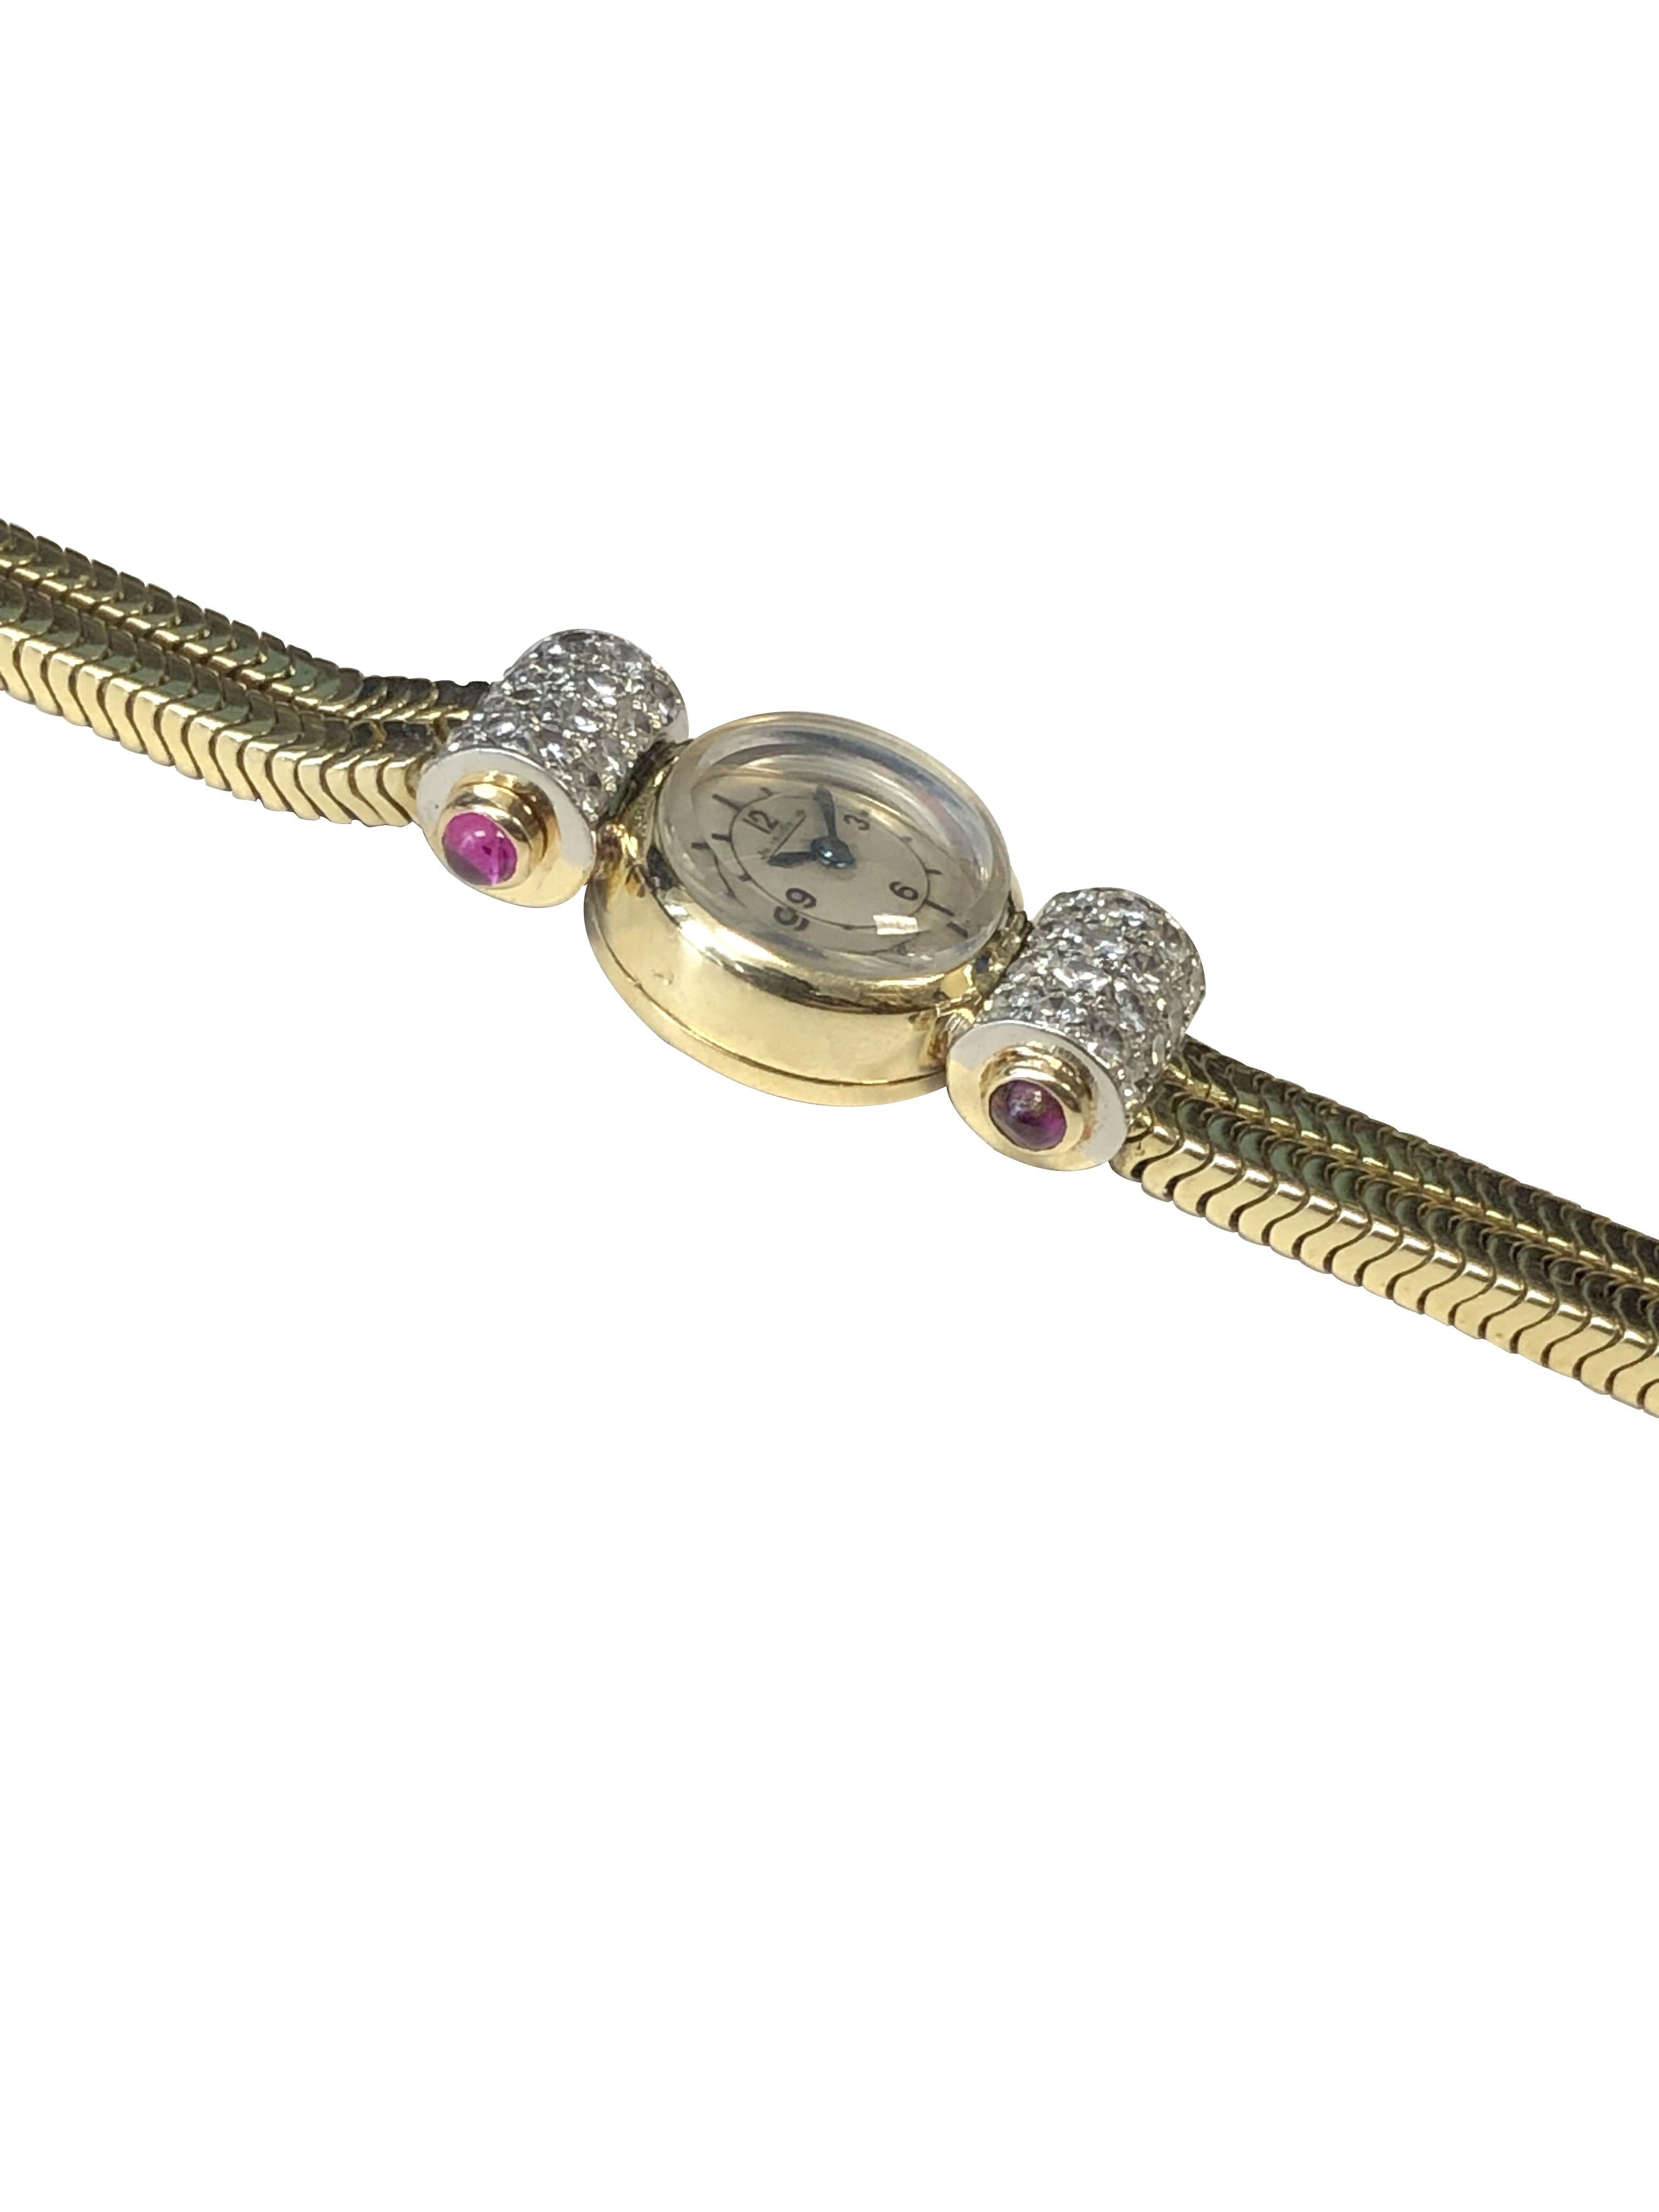 Circa 1930s Jaeger LeCoultre Ladies Art Deco Wrist Watch, 14 M.M. 18K Yellow Gold 2 piece case. 17 Jewel Mechanical, Manual Back wind movement, silver satin dial. The sides of the case are set with 4 rows of Diamonds totaling .40 Carat and Further